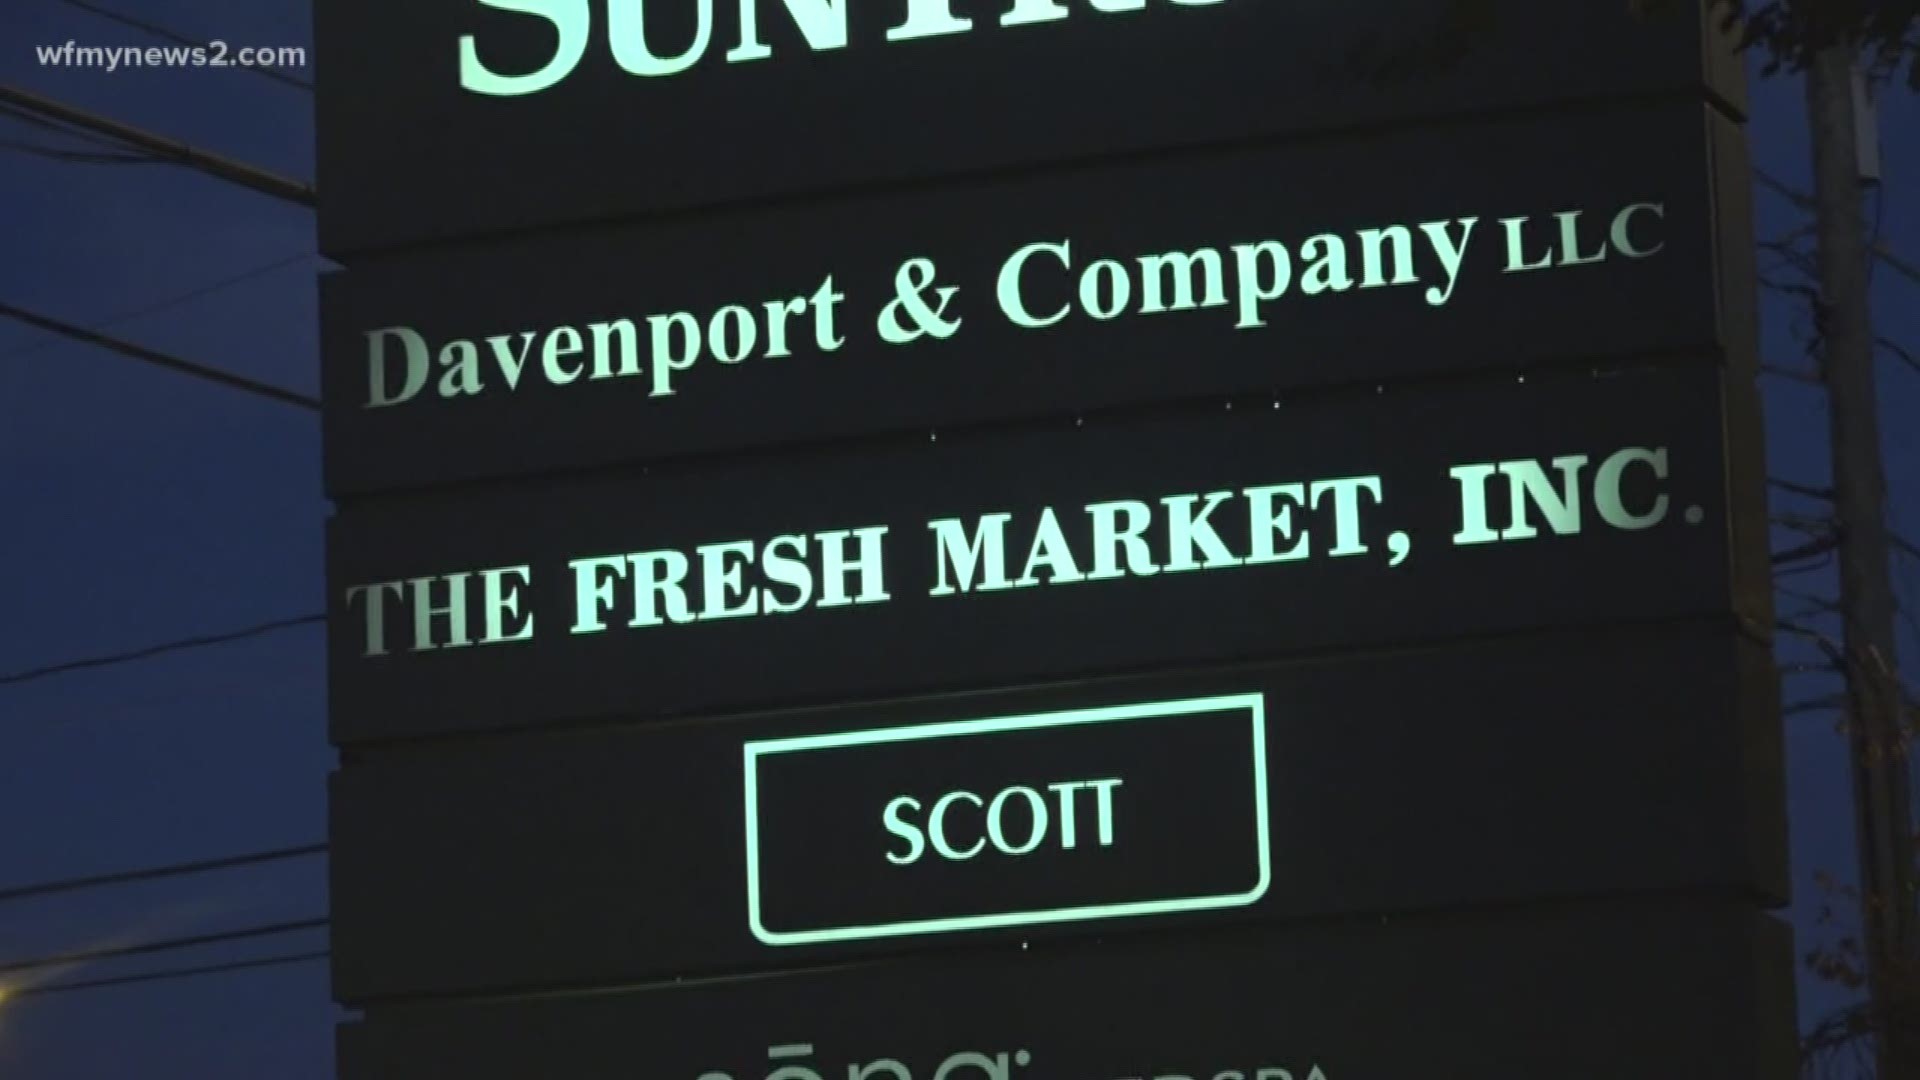 After much debate, The Fresh Market Will Get incentives from Greensboro and High Point to expand its footprint in the area.